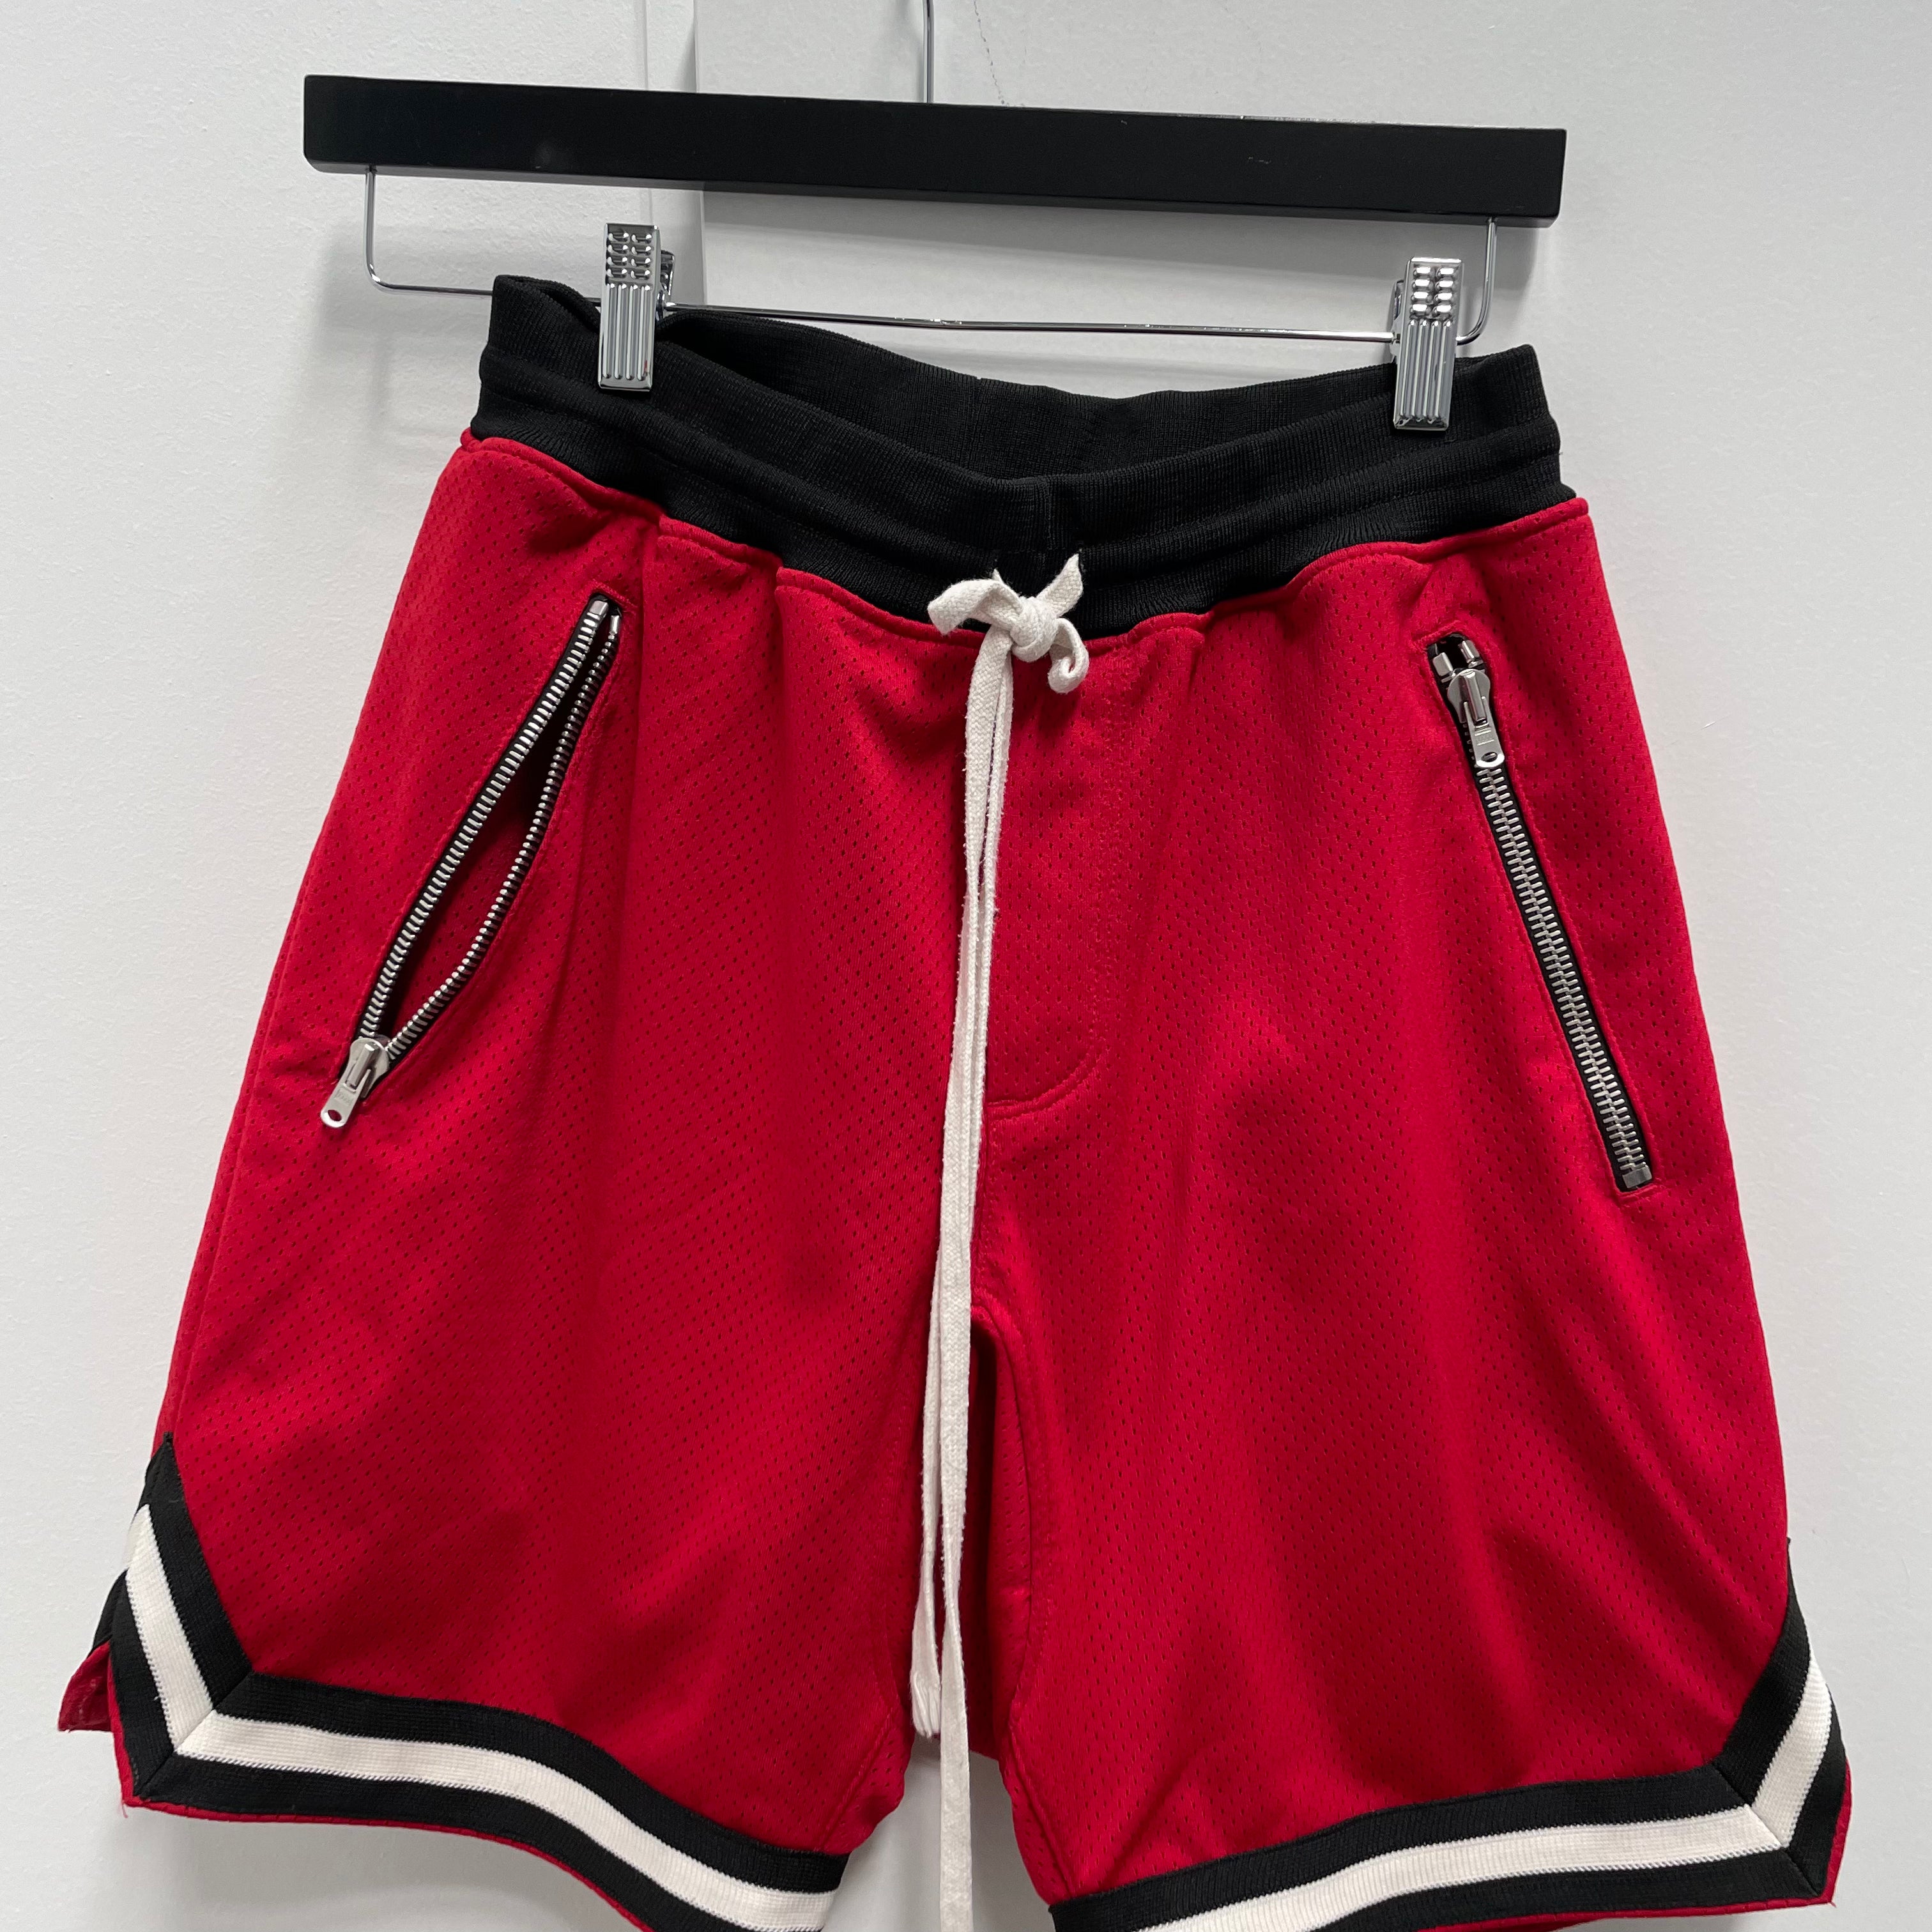 fear of god 5th shorts S size